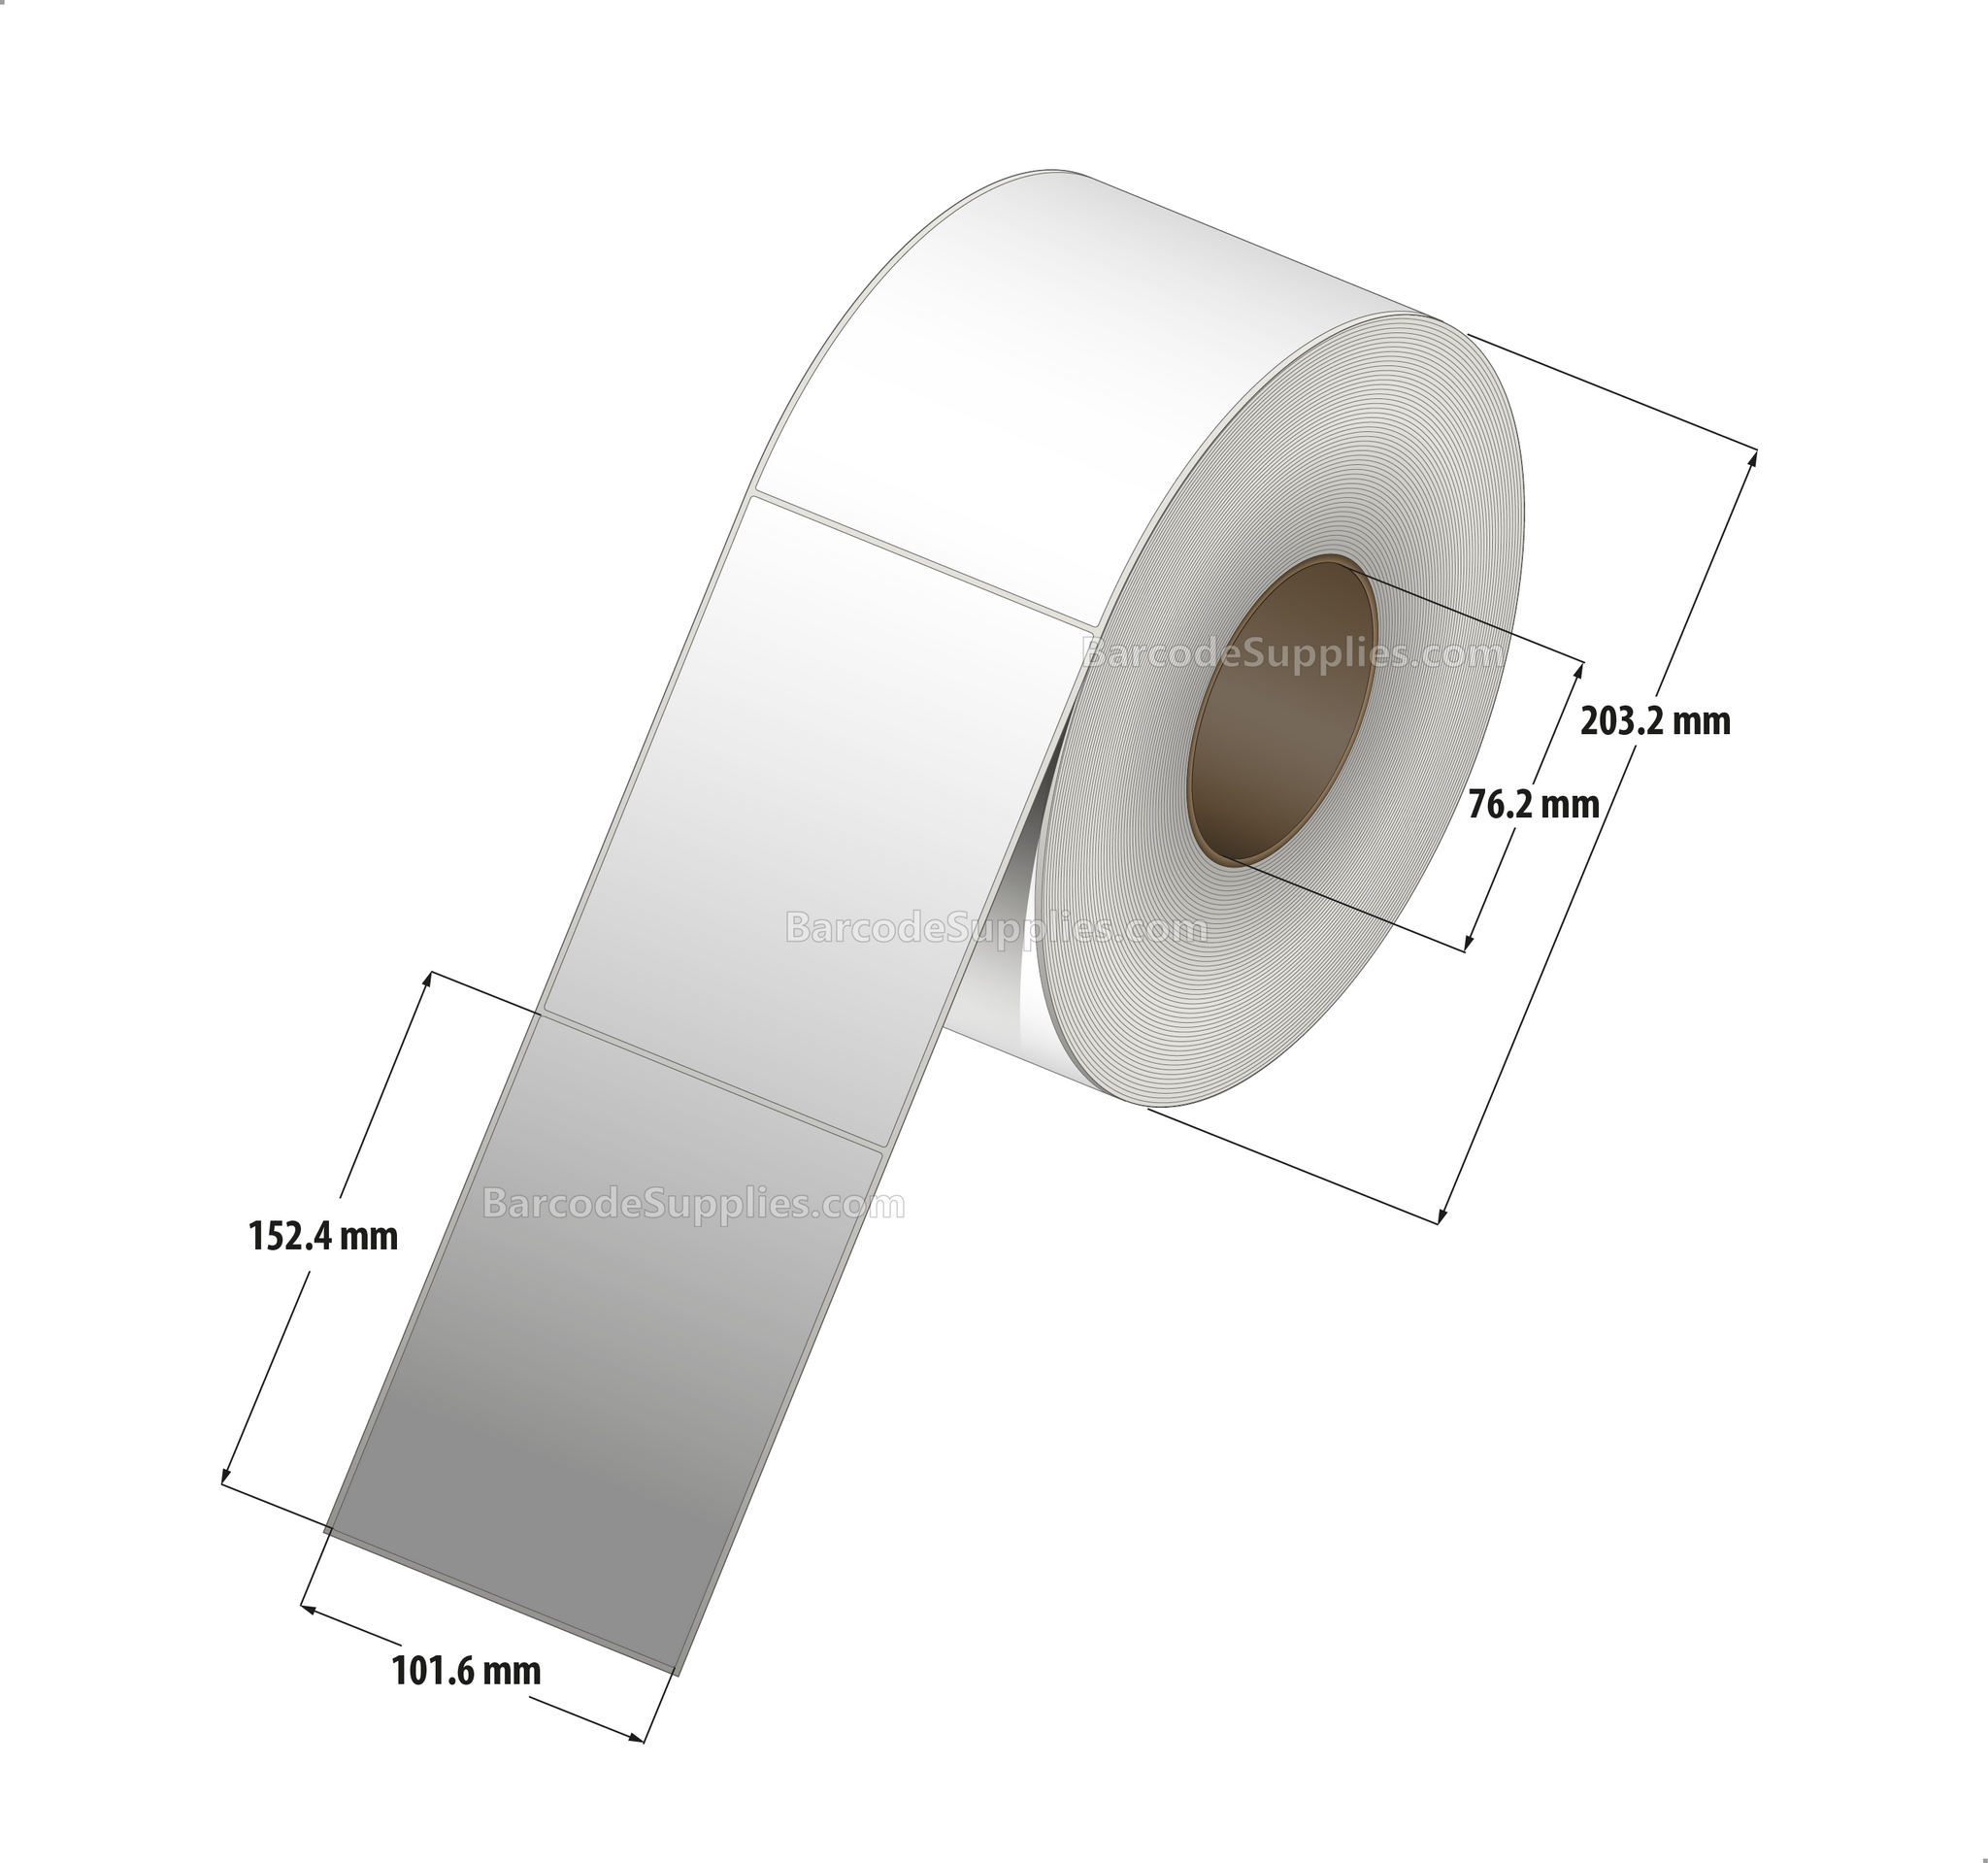 4 x 6 Thermal Transfer White Labels With Permanent Acrylic Adhesive - Not Perforated - 1000 Labels Per Roll - Carton Of 4 Rolls - 4000 Labels Total - MPN: TH46-1